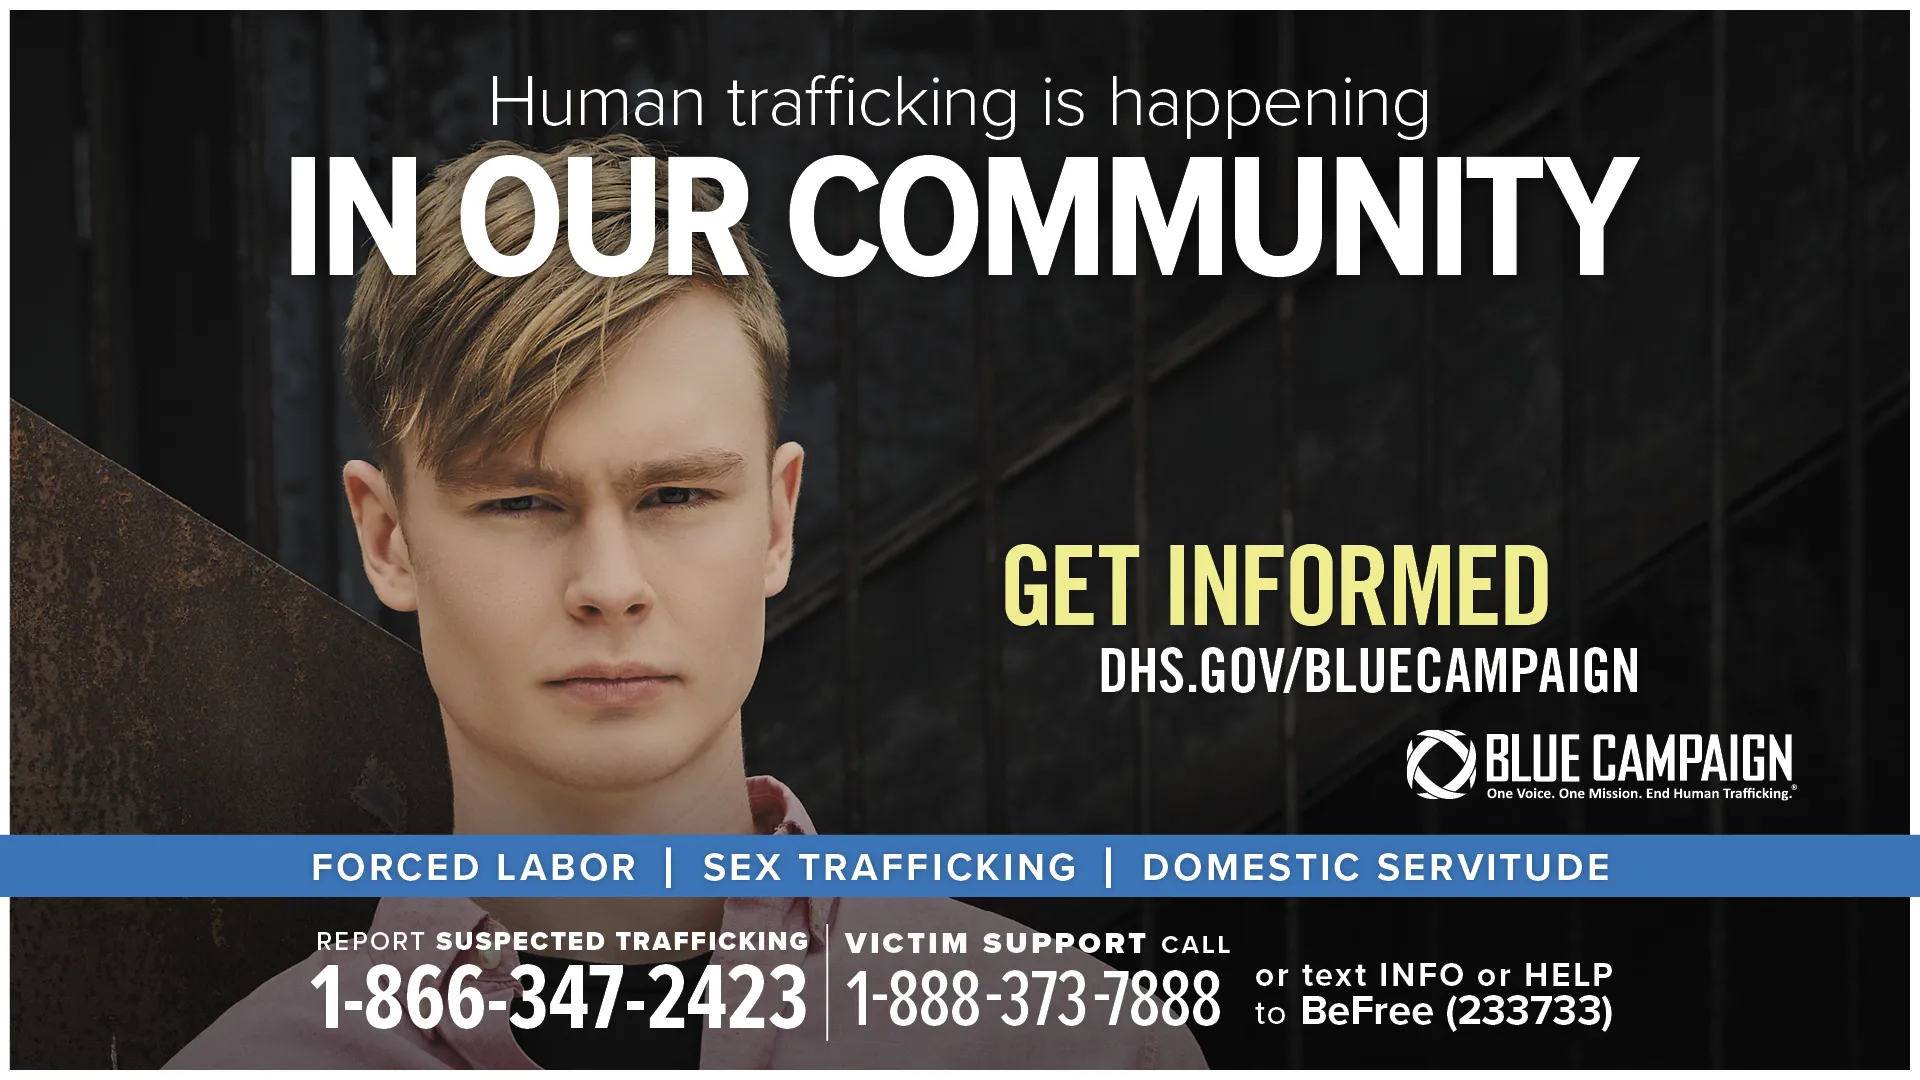 This poster shows a Caucasian teen male in front of a wall looking directly into the camera with a neutral expression with the text “Human trafficking is happening in our community. Get informed. DHS.gov/BlueCampaign. Forced Labor, Sex Trafficking, Domestic Servitude. Report suspected trafficking: 1-866-347-2423. Victim support call: 1-888-373-7888 or text INFO or HELP to BeFree (233733).”